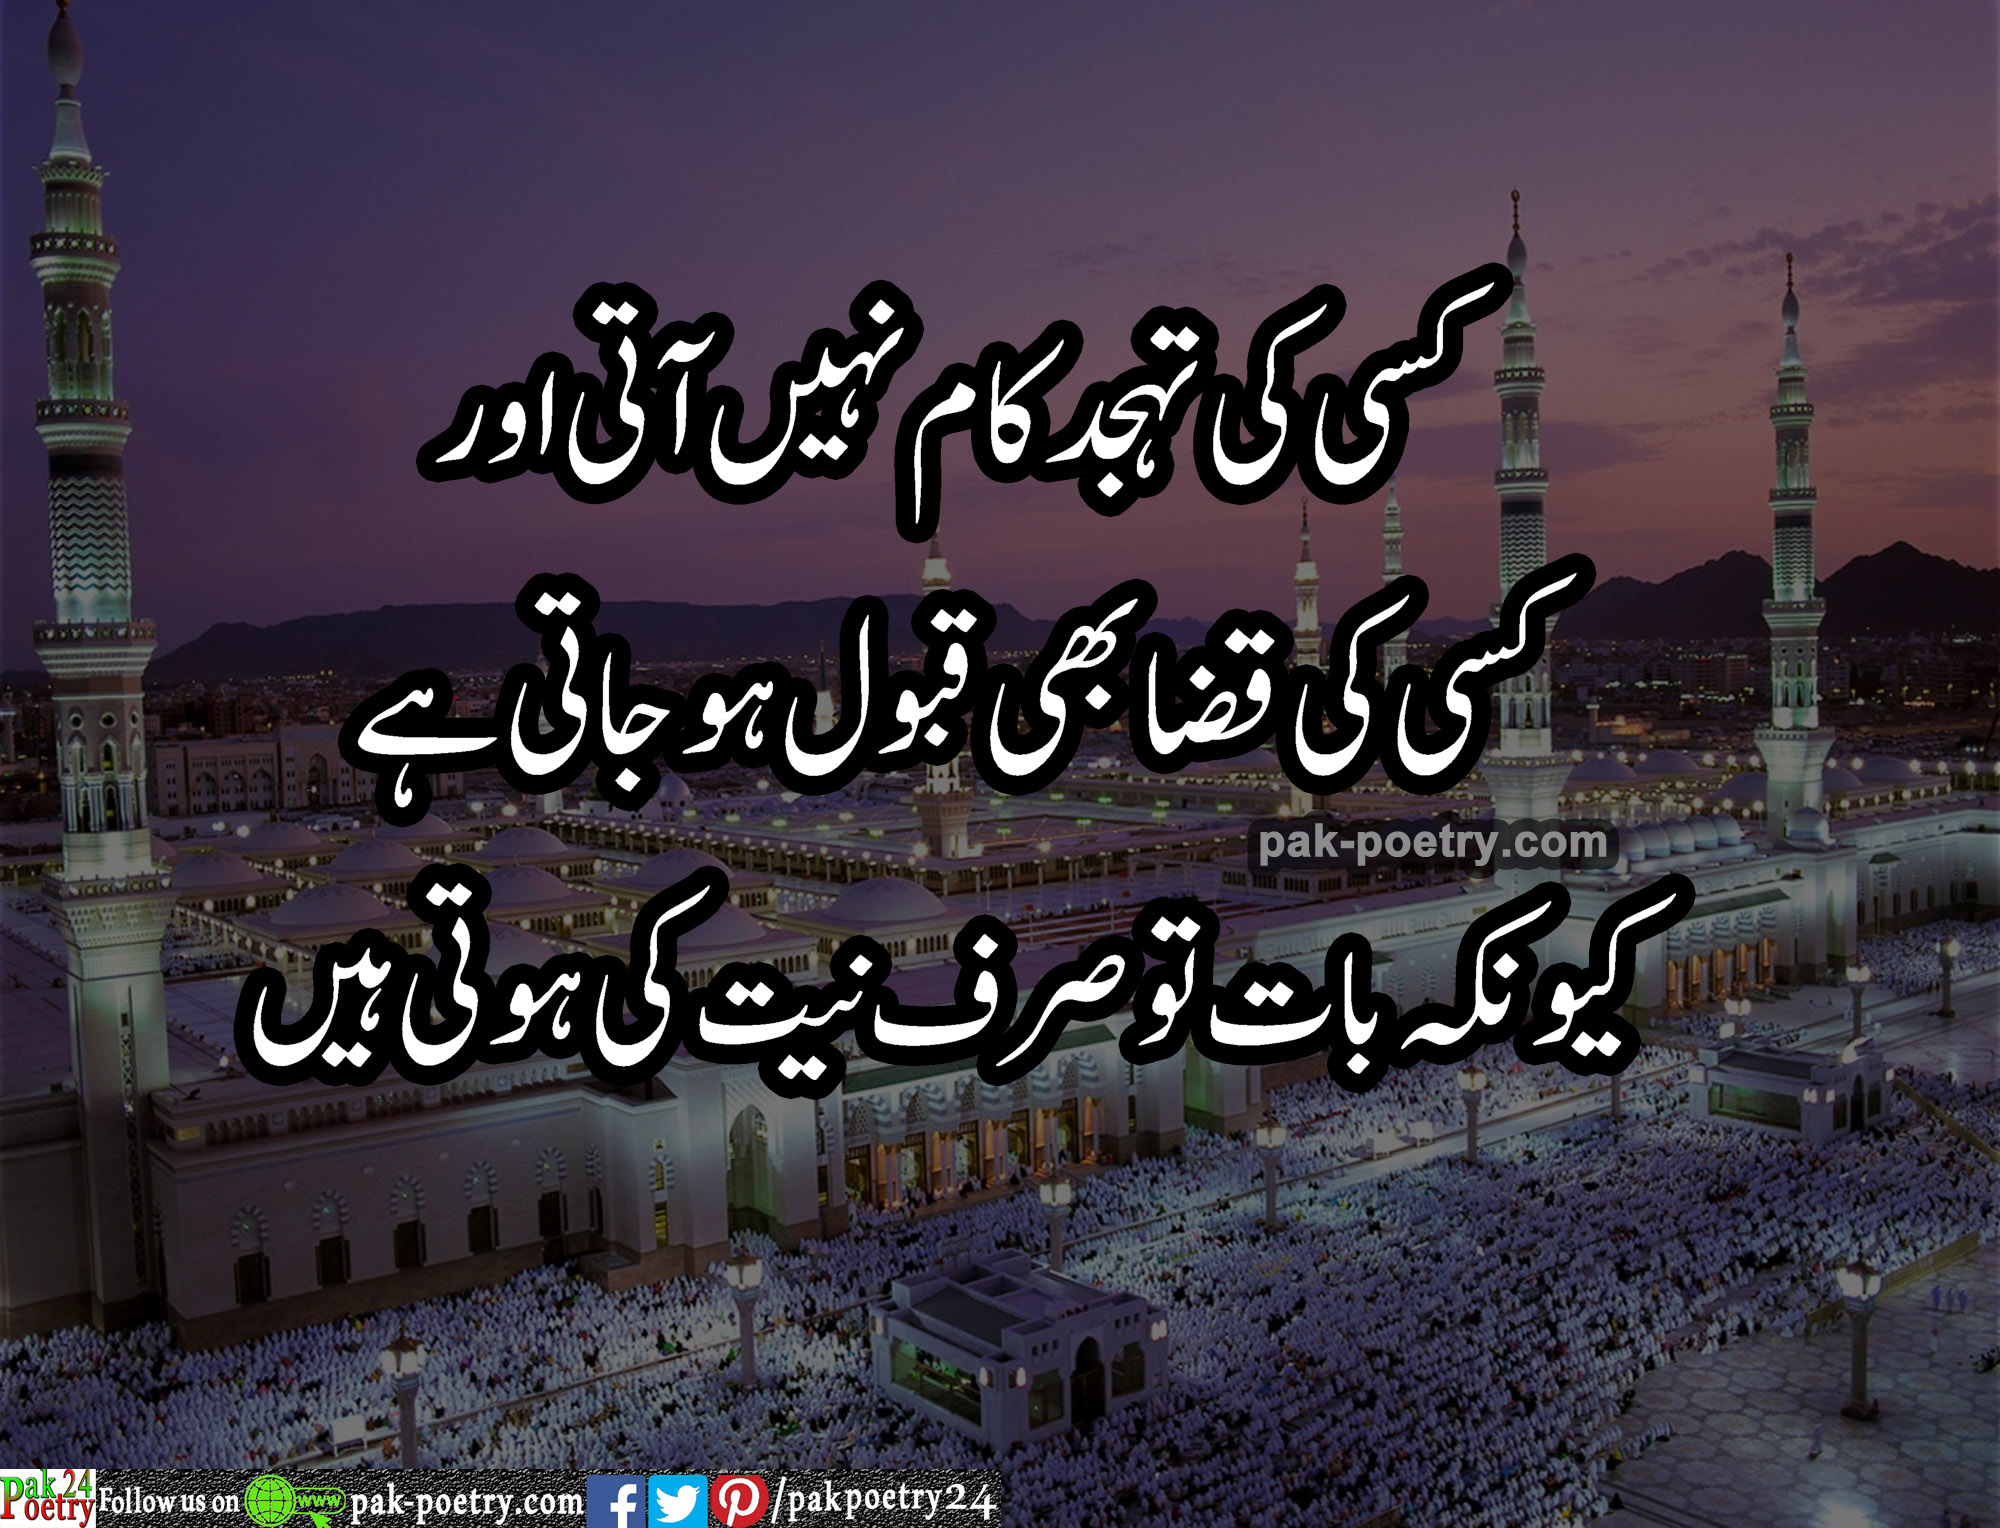 reality quotes, reality poetry in urdu, reality poetry, quotes about reality in urdu, poetry about reality in urdu, sad reality, poetry reality, poetry on reality, reality best poetry urdu, sad reality poetry in urdu, reality based poetry in urdu, poetry about reality, reality, Islamic poetry, Islamic images, Islamic poetry in urdu, Poetry Islamic, urdu Islamic poetry, allah Islamic poetry, Islamic poetry pics, Islamic poetry urdu, Islamic photos, dua Islamic poetry,